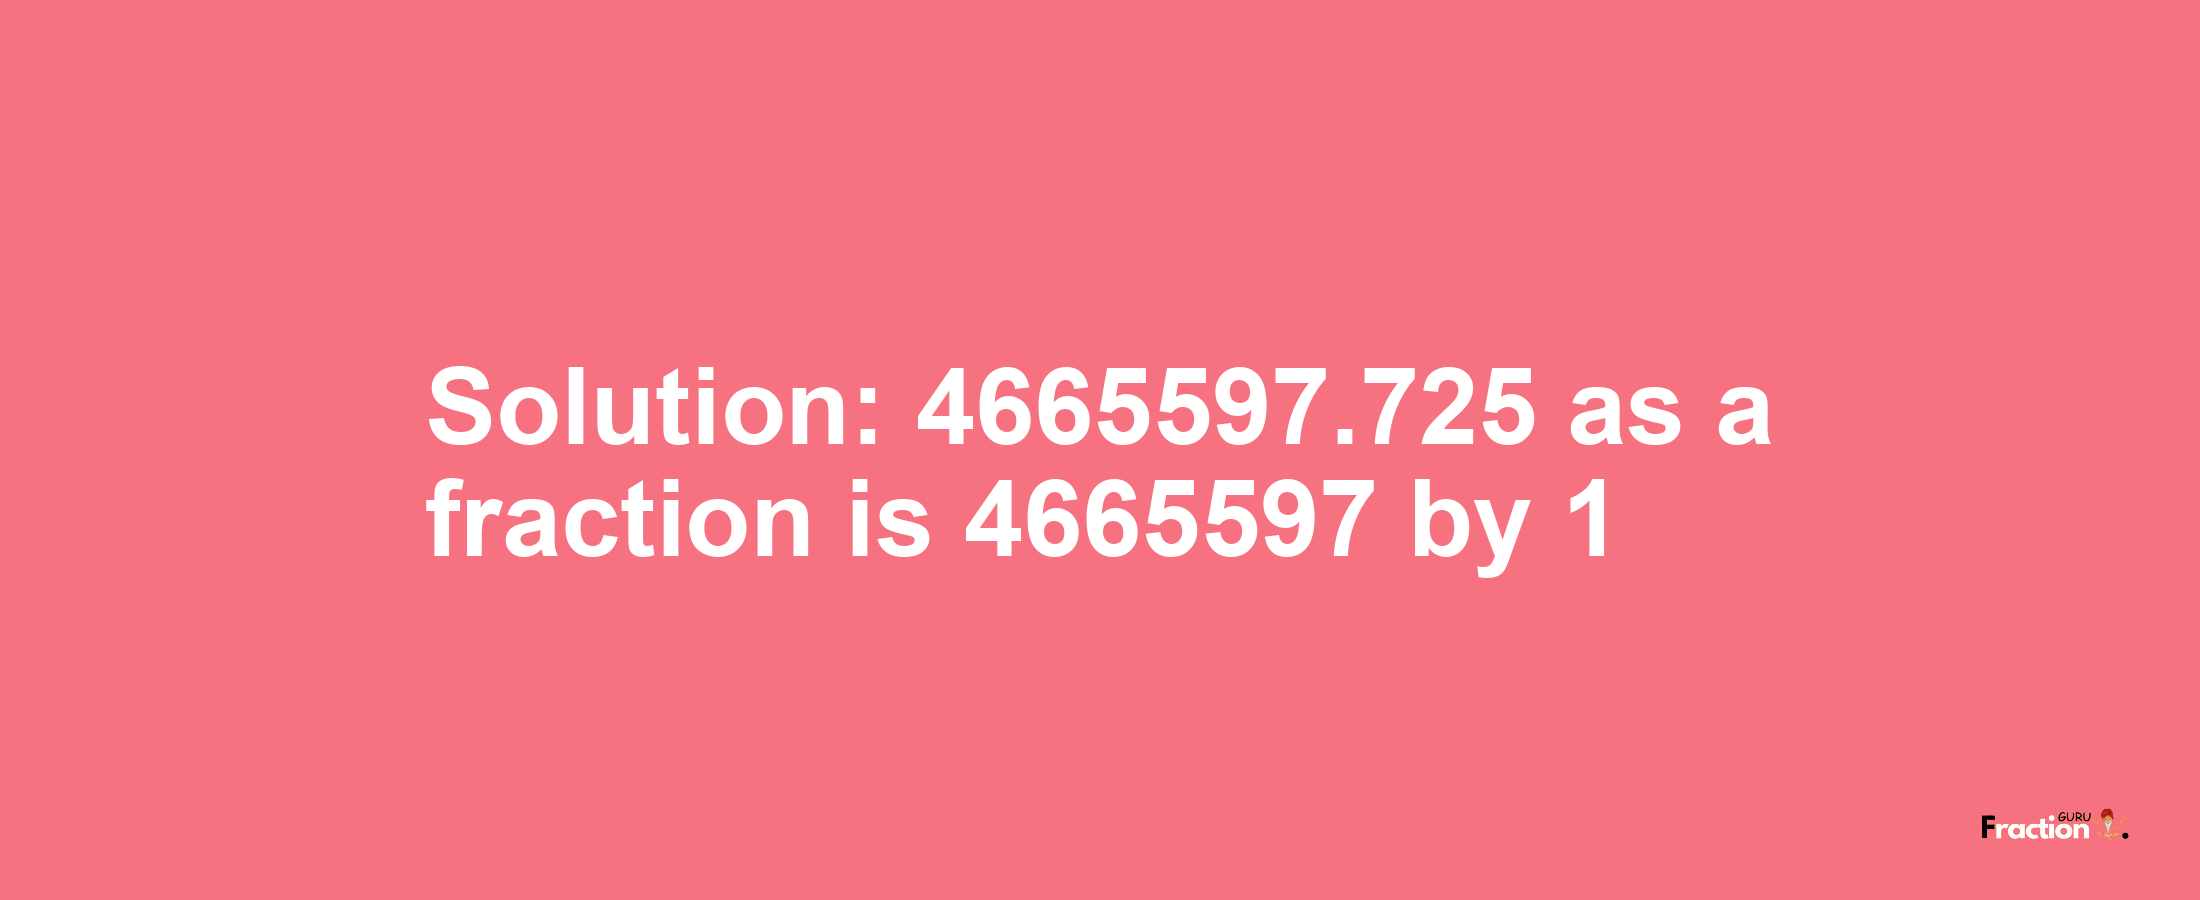 Solution:4665597.725 as a fraction is 4665597/1